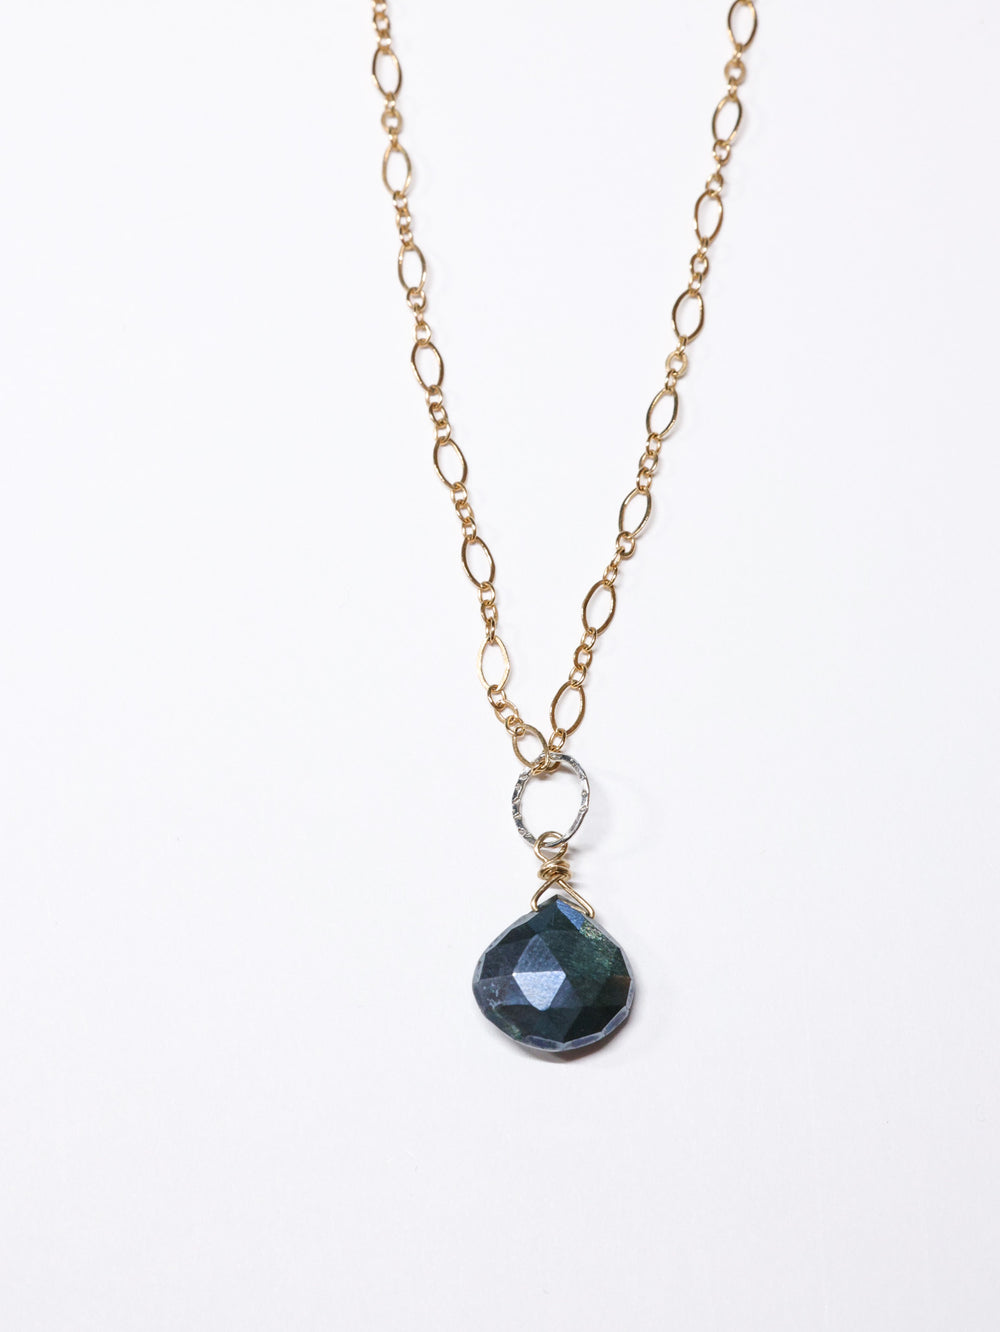 Mystic royal moonstone necklace in gold 2 tone